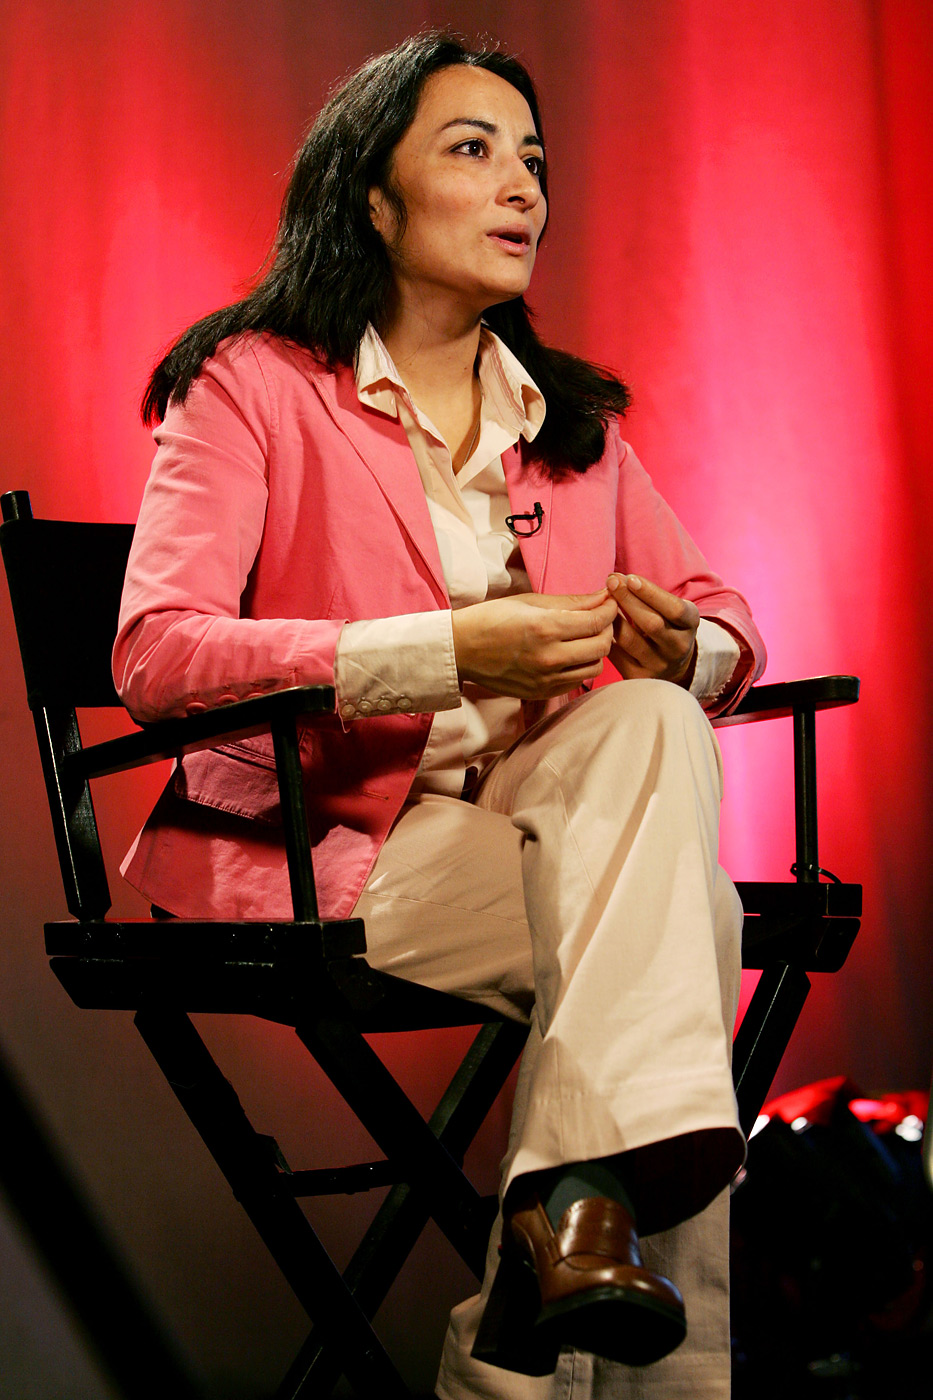 Asra Nomani during an interview in New York on April 6, 2005. (Mike Segar—Reuters)